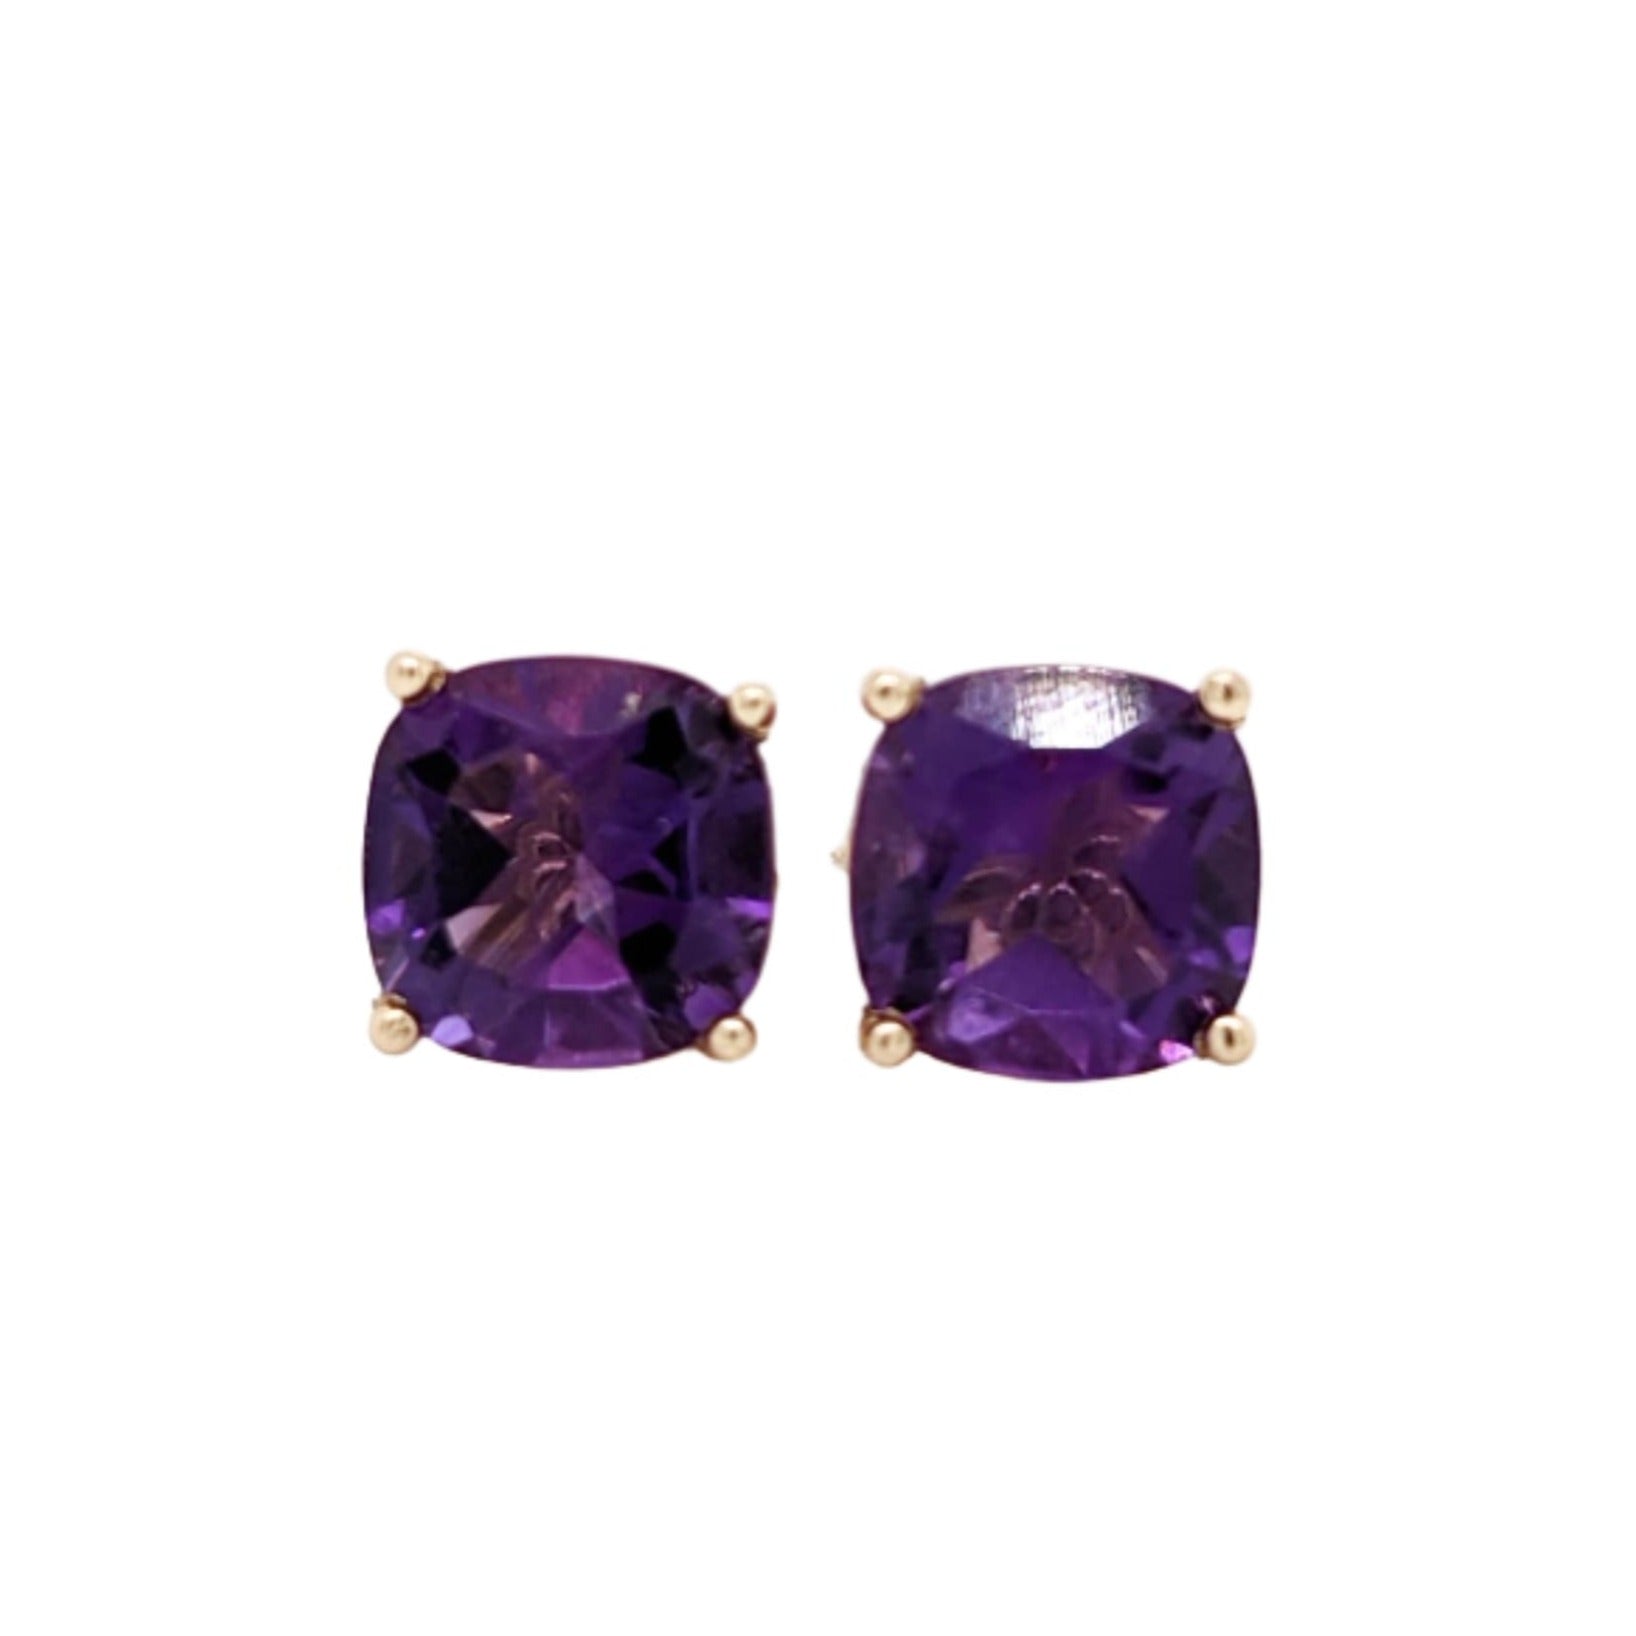 Amethyst Studs in Solid 14K White, Yellow or Rose Gold | Cushion 6mm | February Birthstone | Minimalist Solitaire Earrings